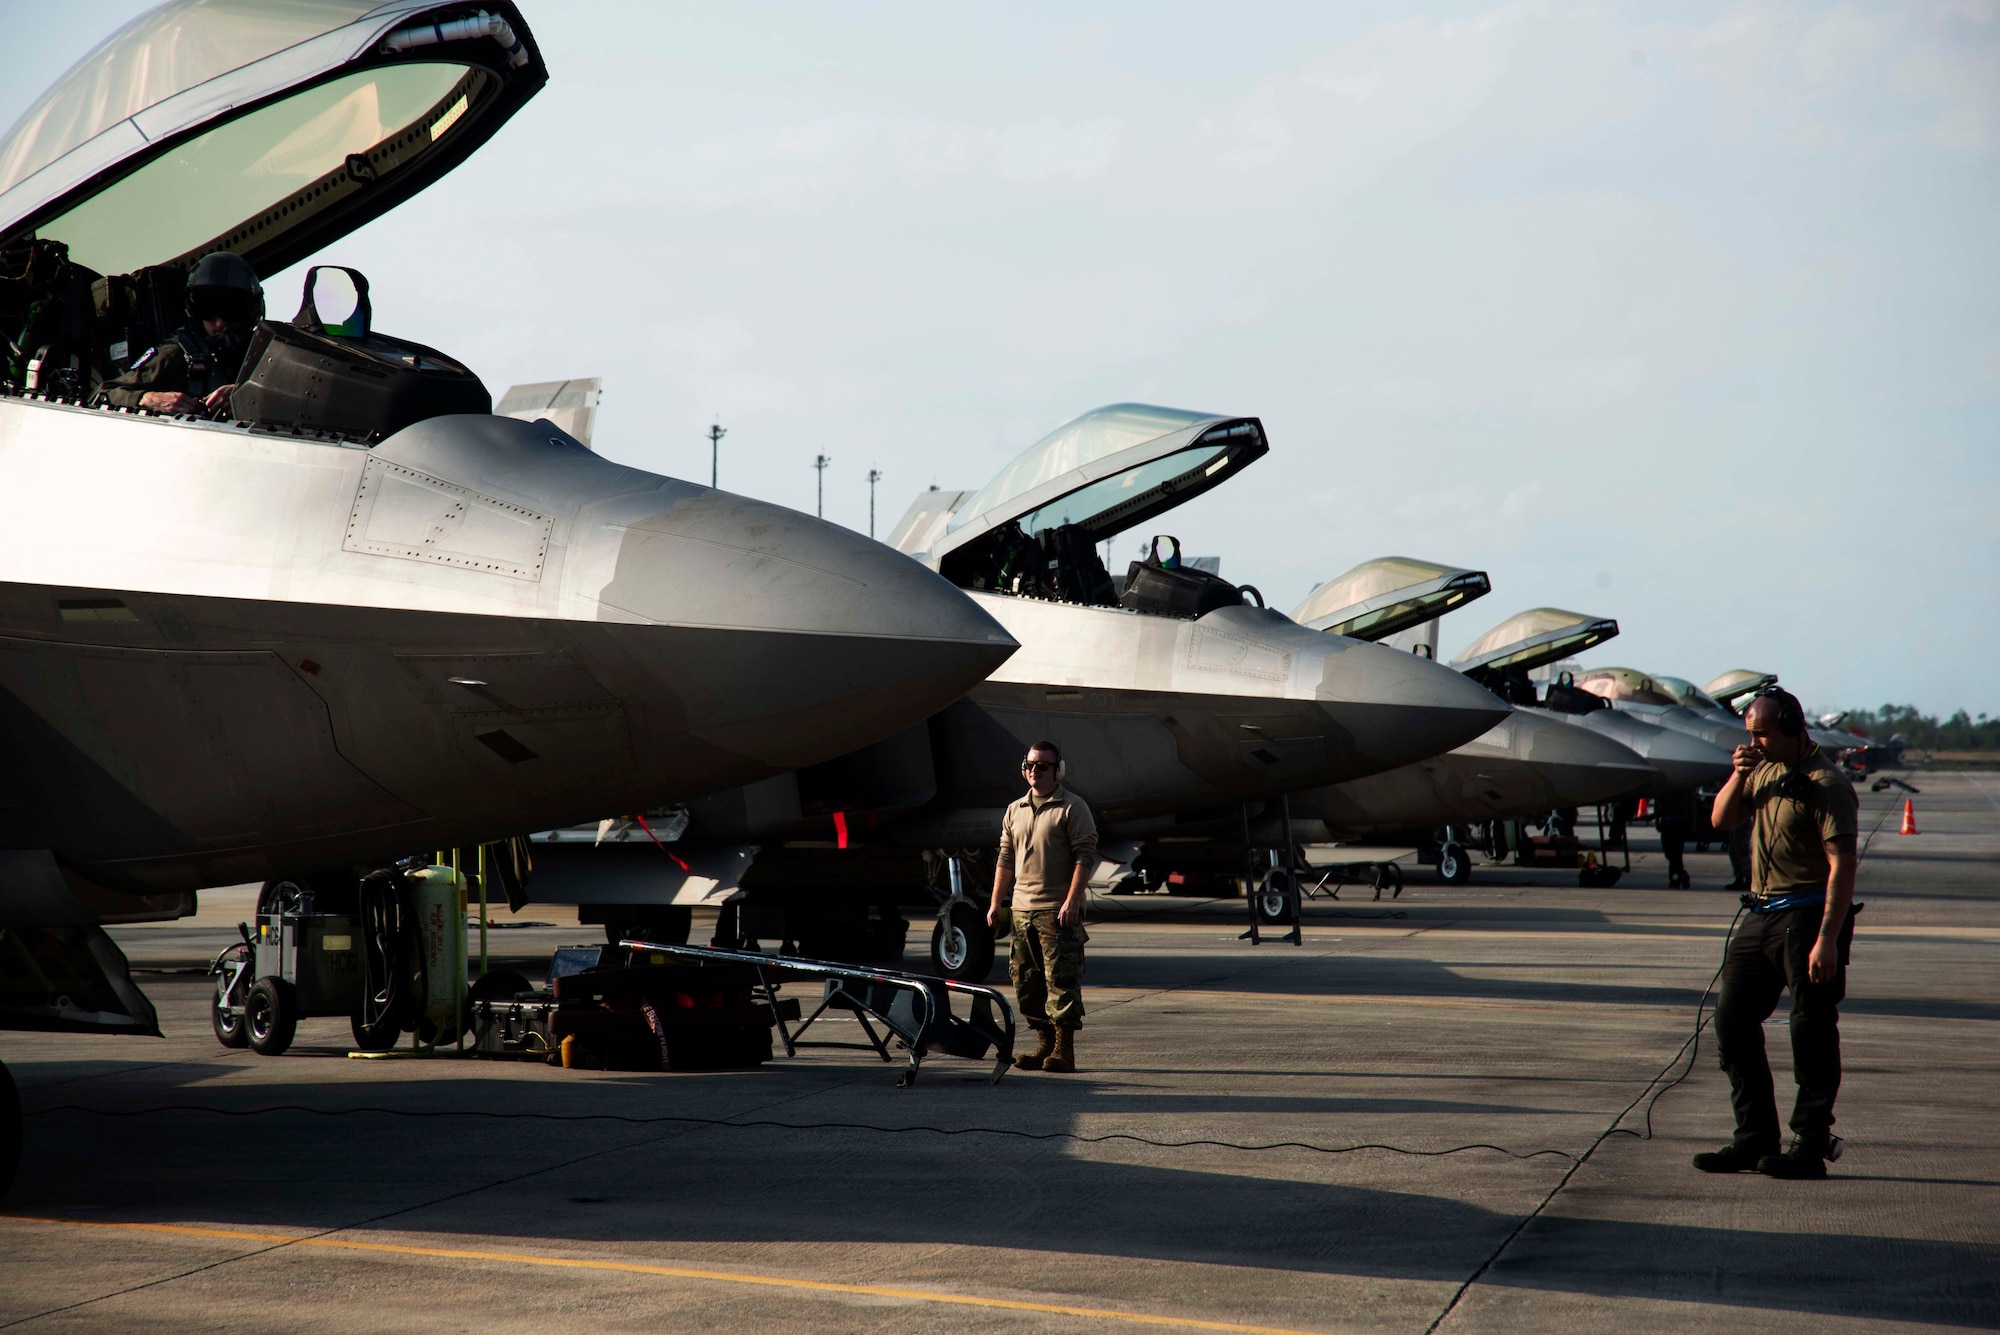 The aircrew assigned to an F-22 Raptor perform maintenance checks Nov. 6, 2019, at Tyndall Air Force Base, Florida. The pilot, airframe, and maintenance team supported Checkered Flag 20-1, which is a large-scale aerial exercise designed to integrate fourth and fifth-generation airframes to enhance mobility, deployment, and employment capabilities of aviators and maintainers. The exercise involved airpower assets, more than 50 aircraft, and support personnel from multiple installations. Aircraft and pilots participated in a Weapons System Evaluation Program and are evaluated on air-to-air and air-to-ground operations, providing a unique training environment. (U.S. Air Force photo by Staff Sgt. Magen M. Reeves)